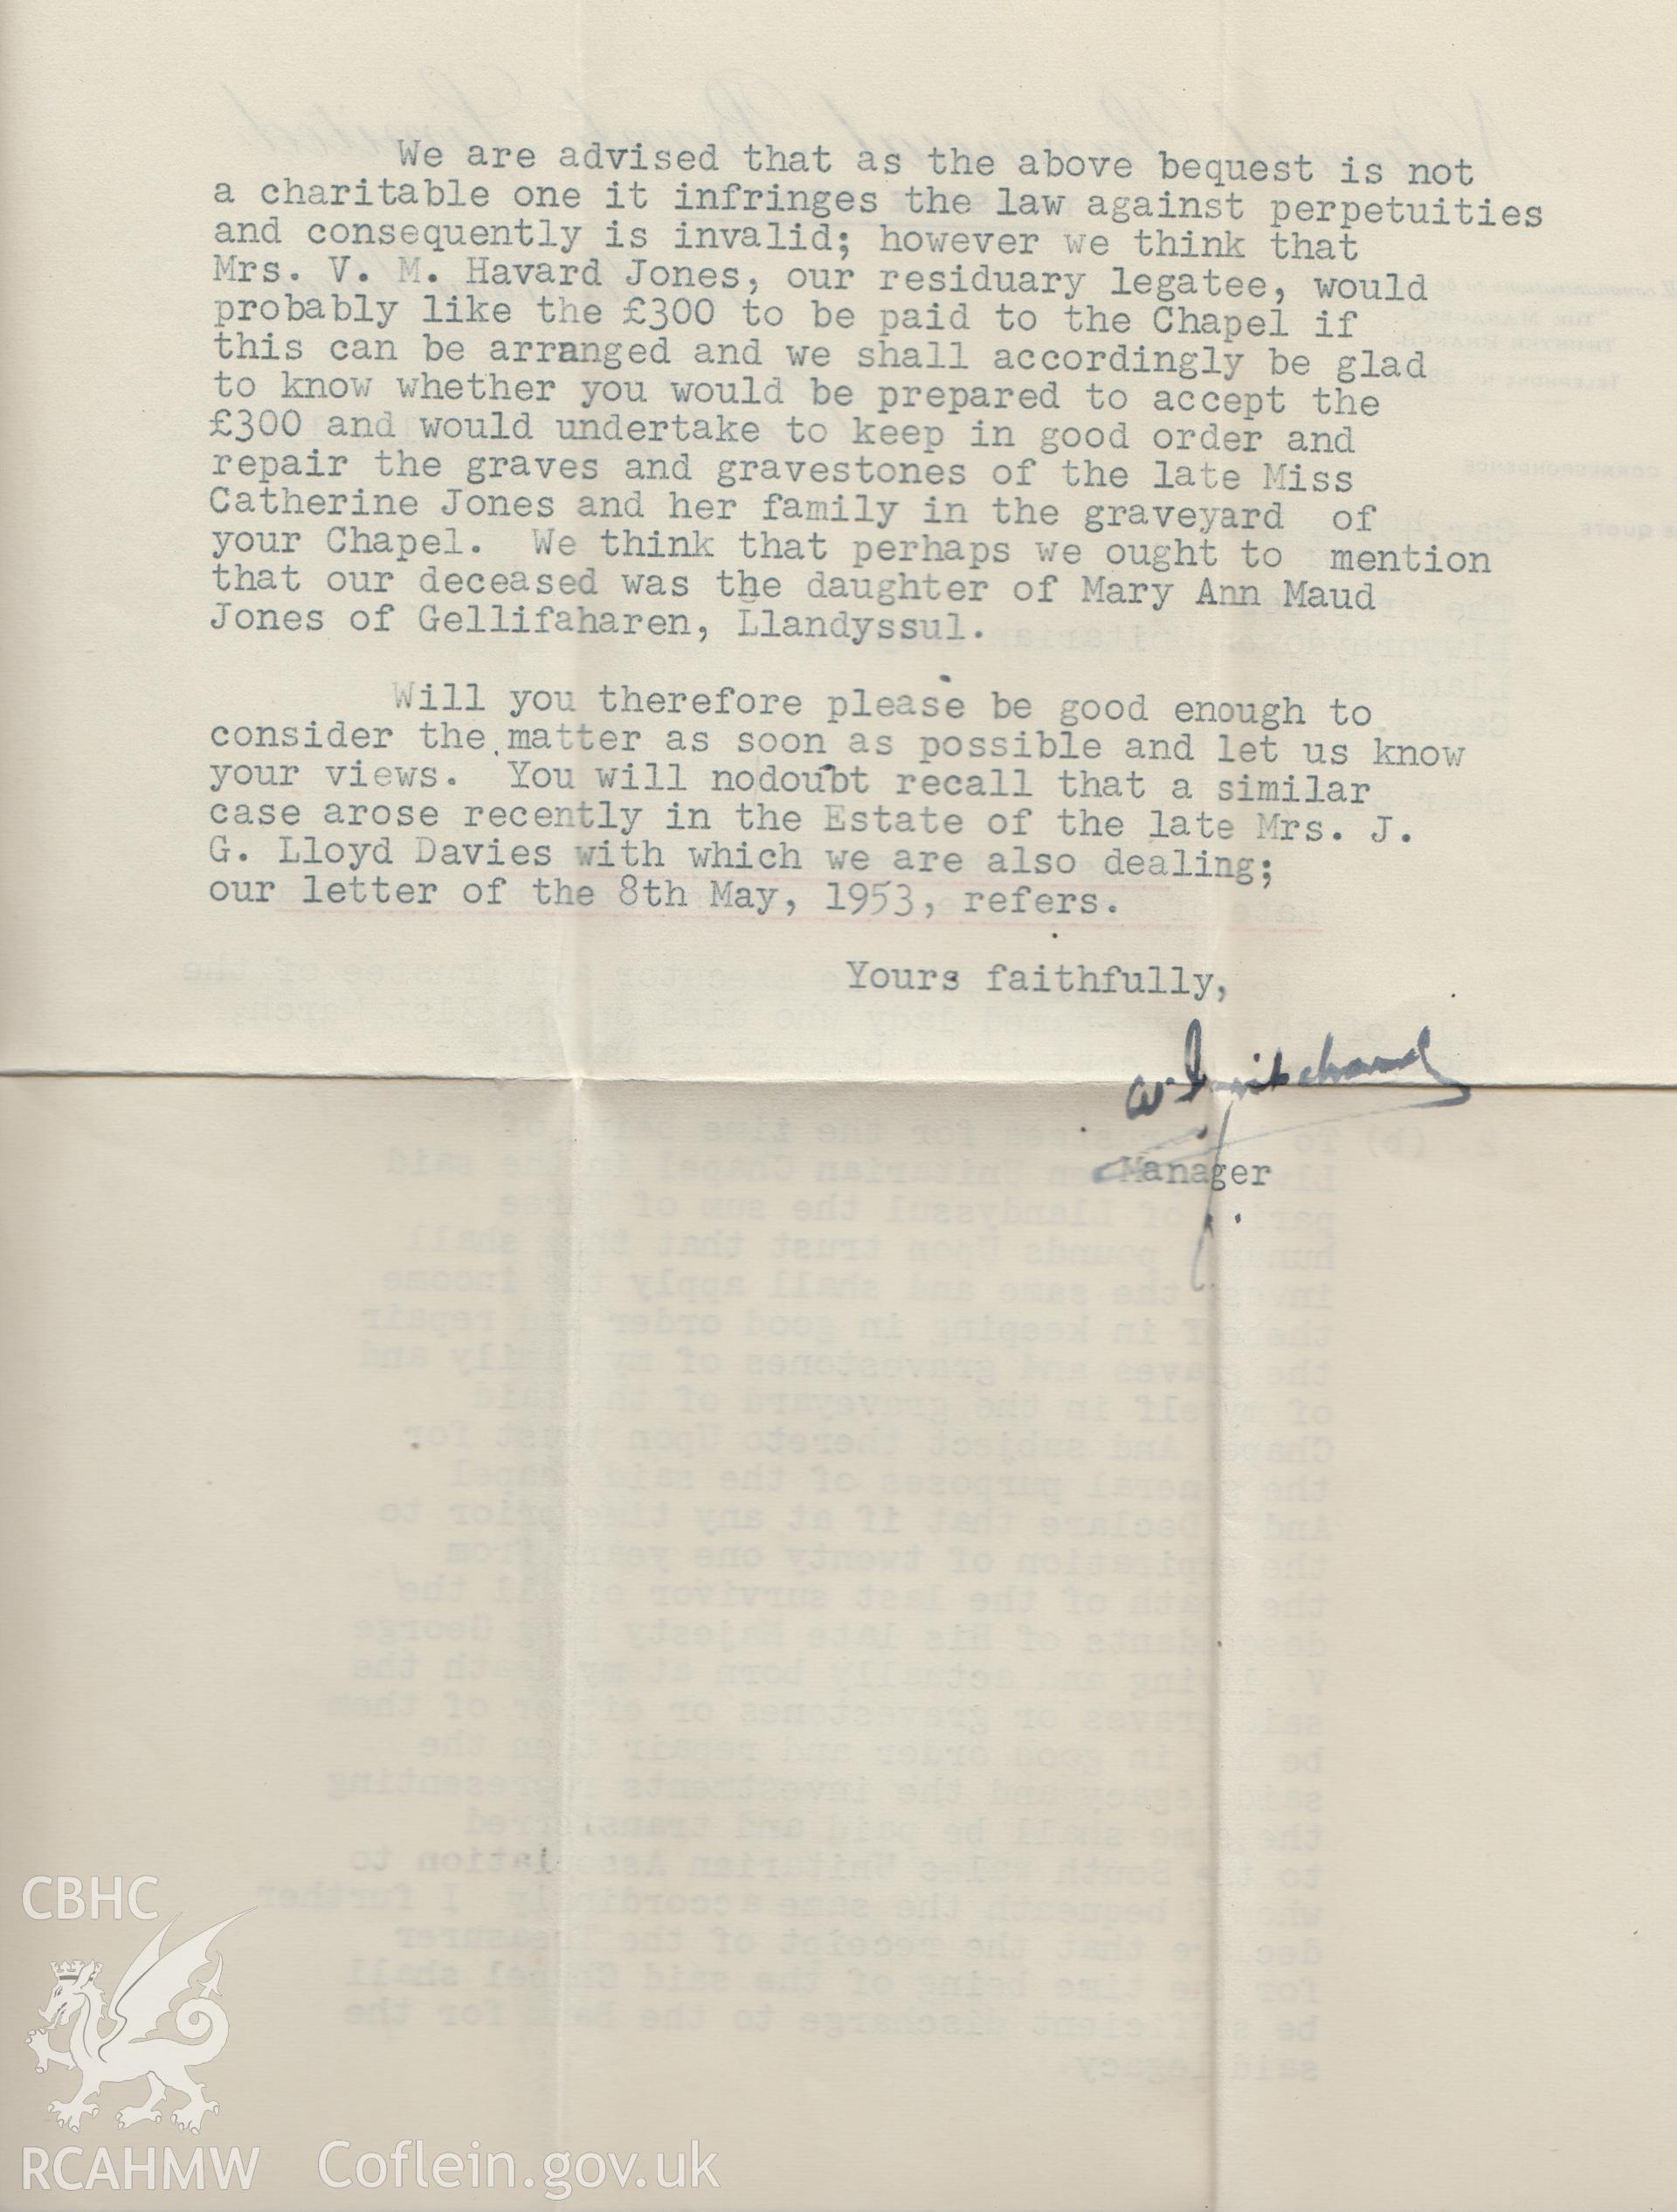 Typed letter regarding bequest from Catherine Jones to Llwynrhydowen for keeping in order graves at Llwynrhydowen chapel. Donated to the RCAHMW during the Digital Dissent Project.